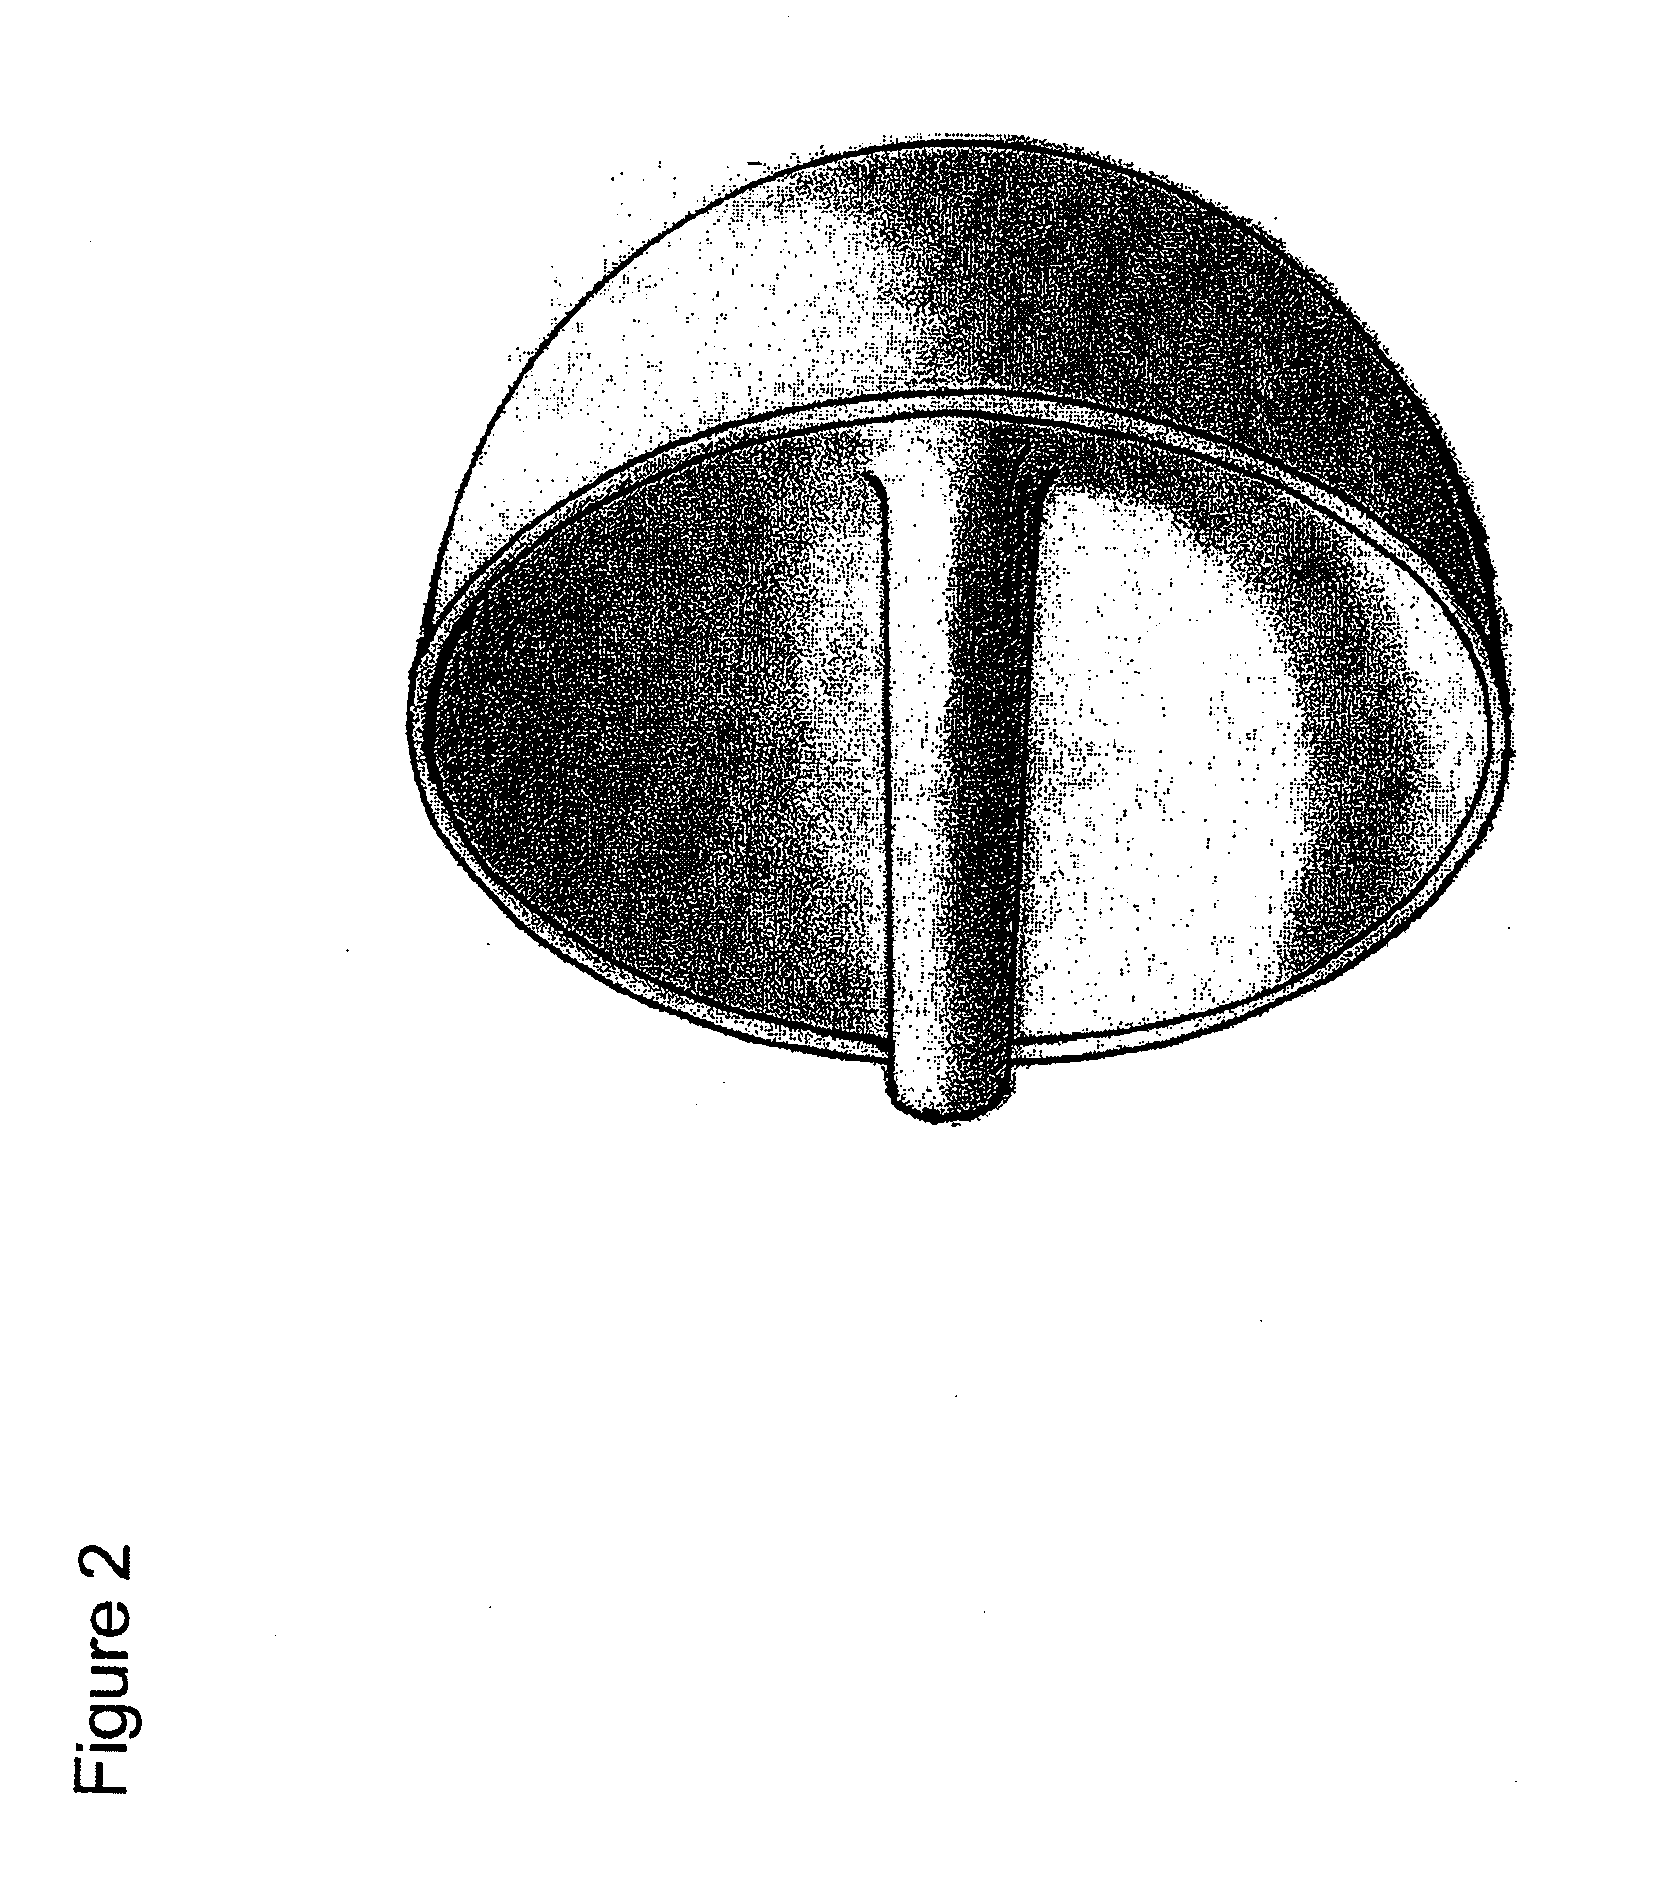 Humeral head resurfacing implant and methods of use thereof